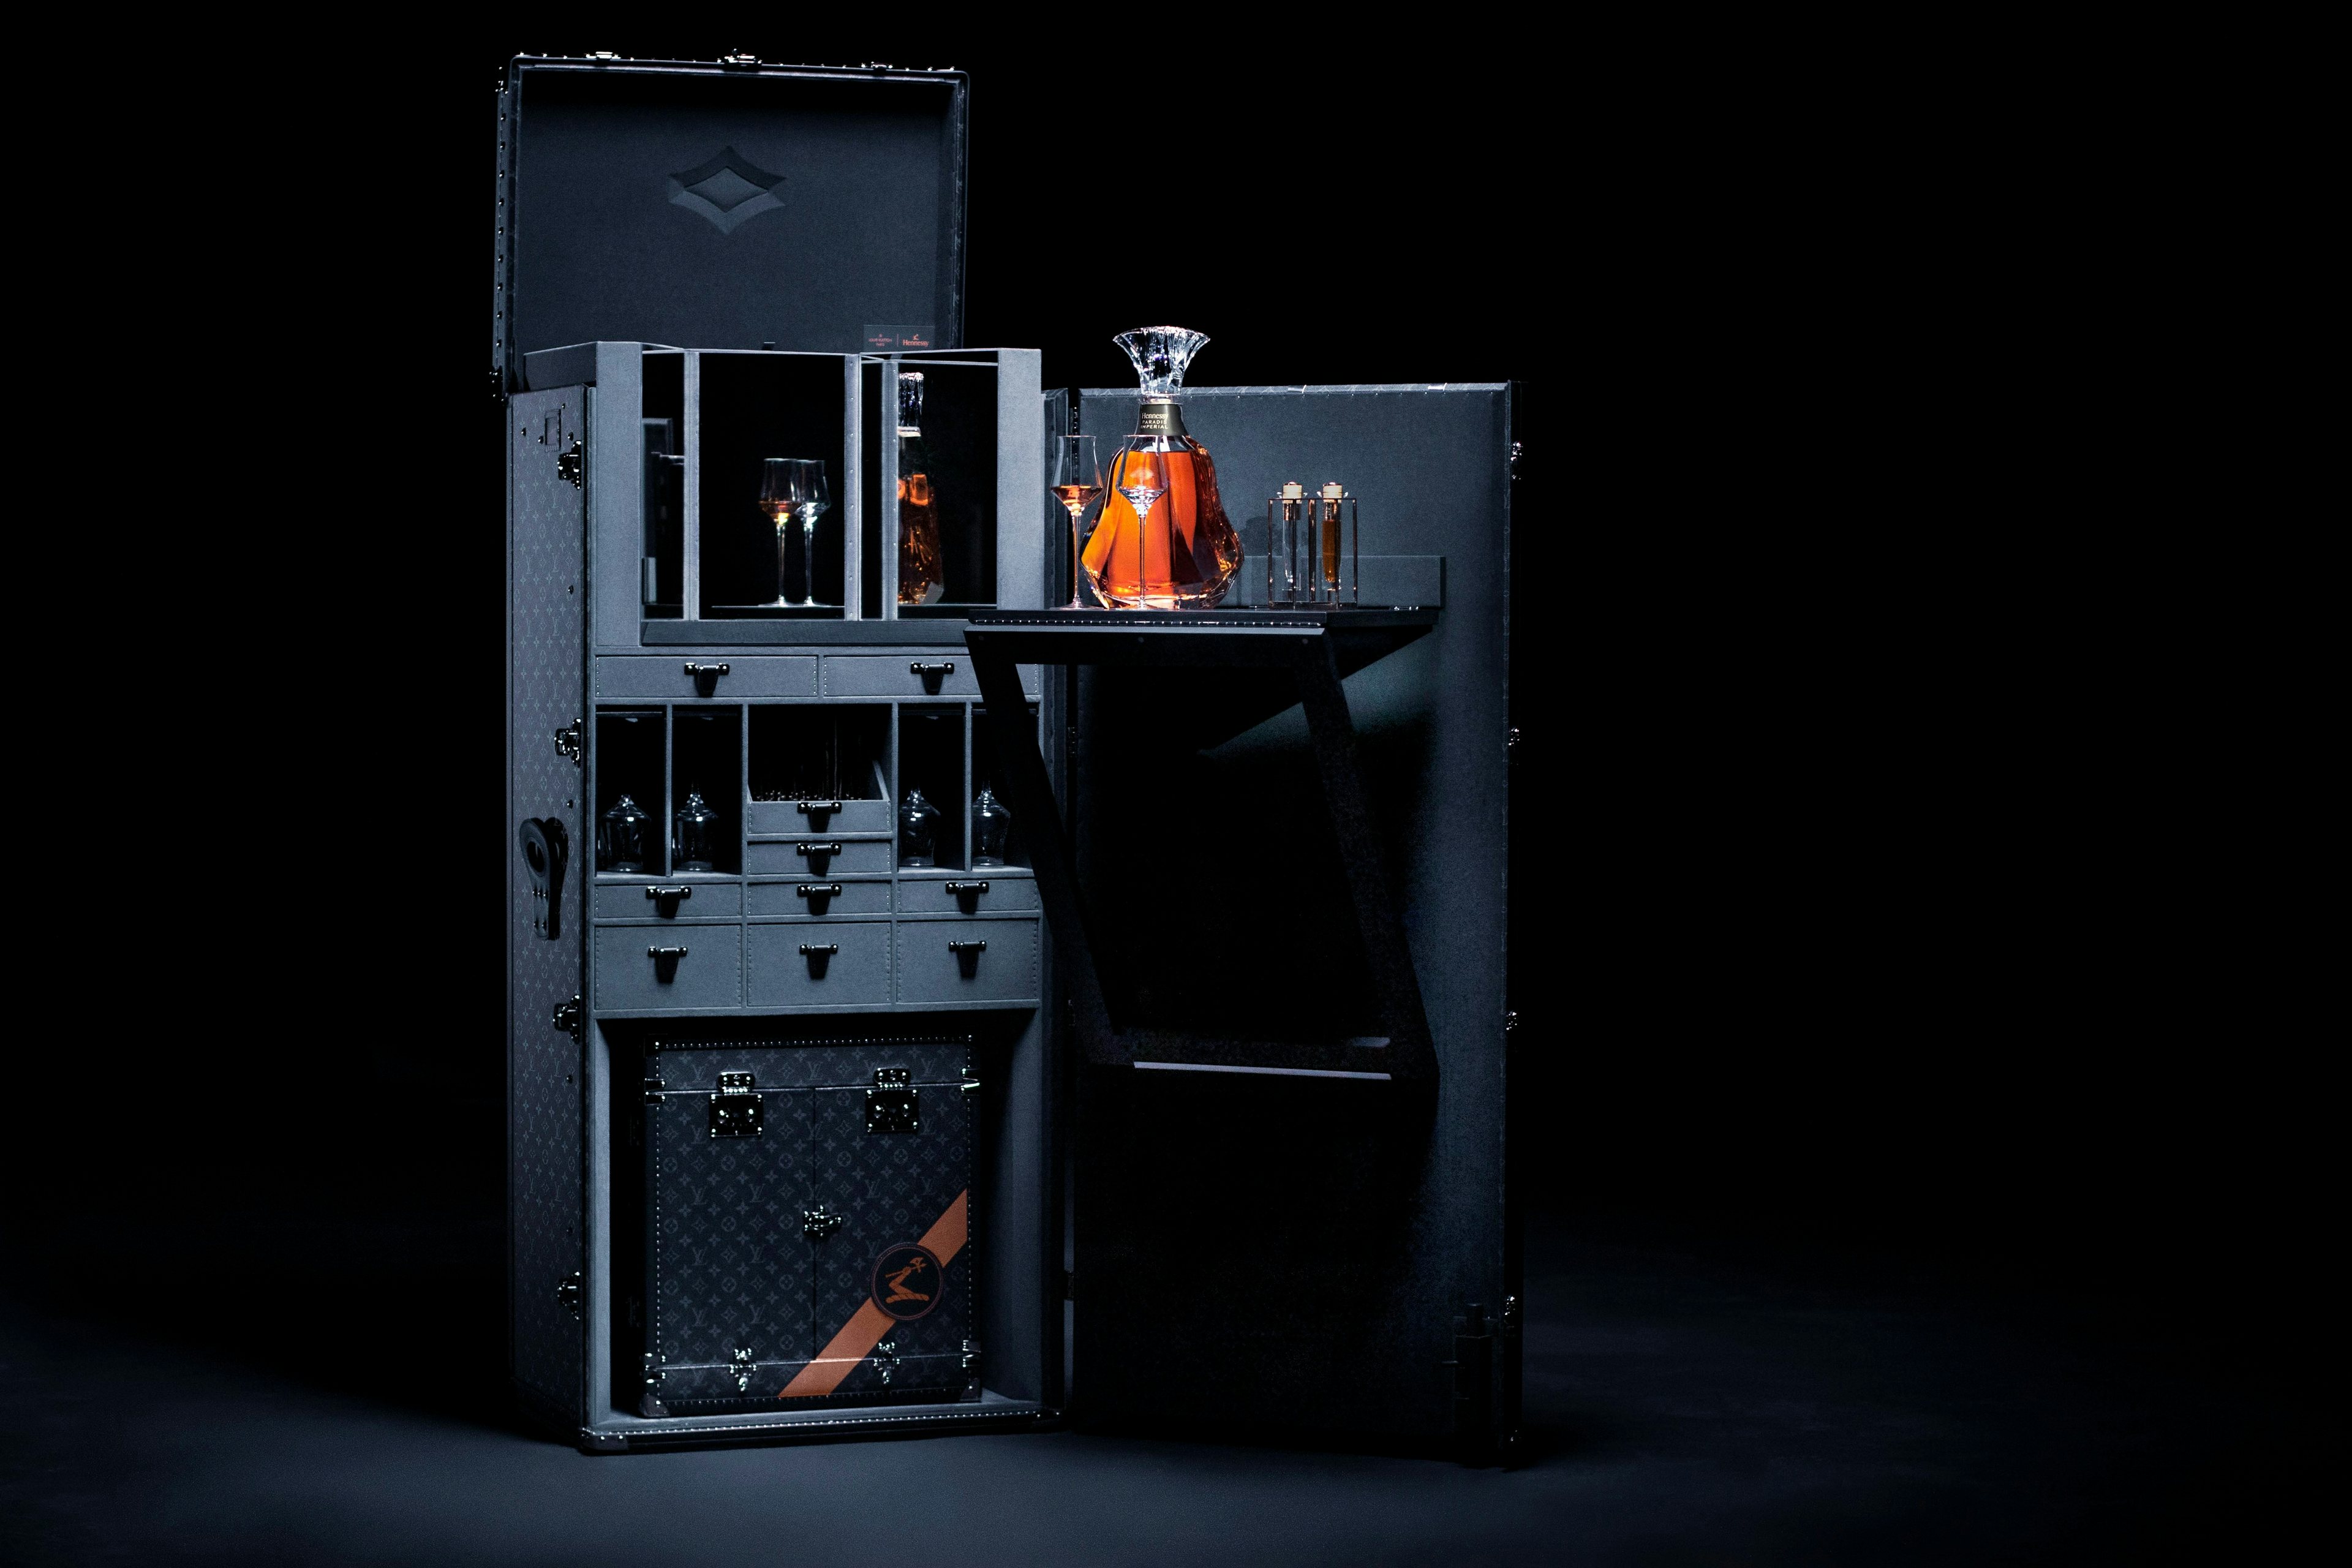 The travel case and bar, which will retail for a staggering 273,000, mark the first collaboration between Louis Vuitton and Hennessy. Courtesy photo